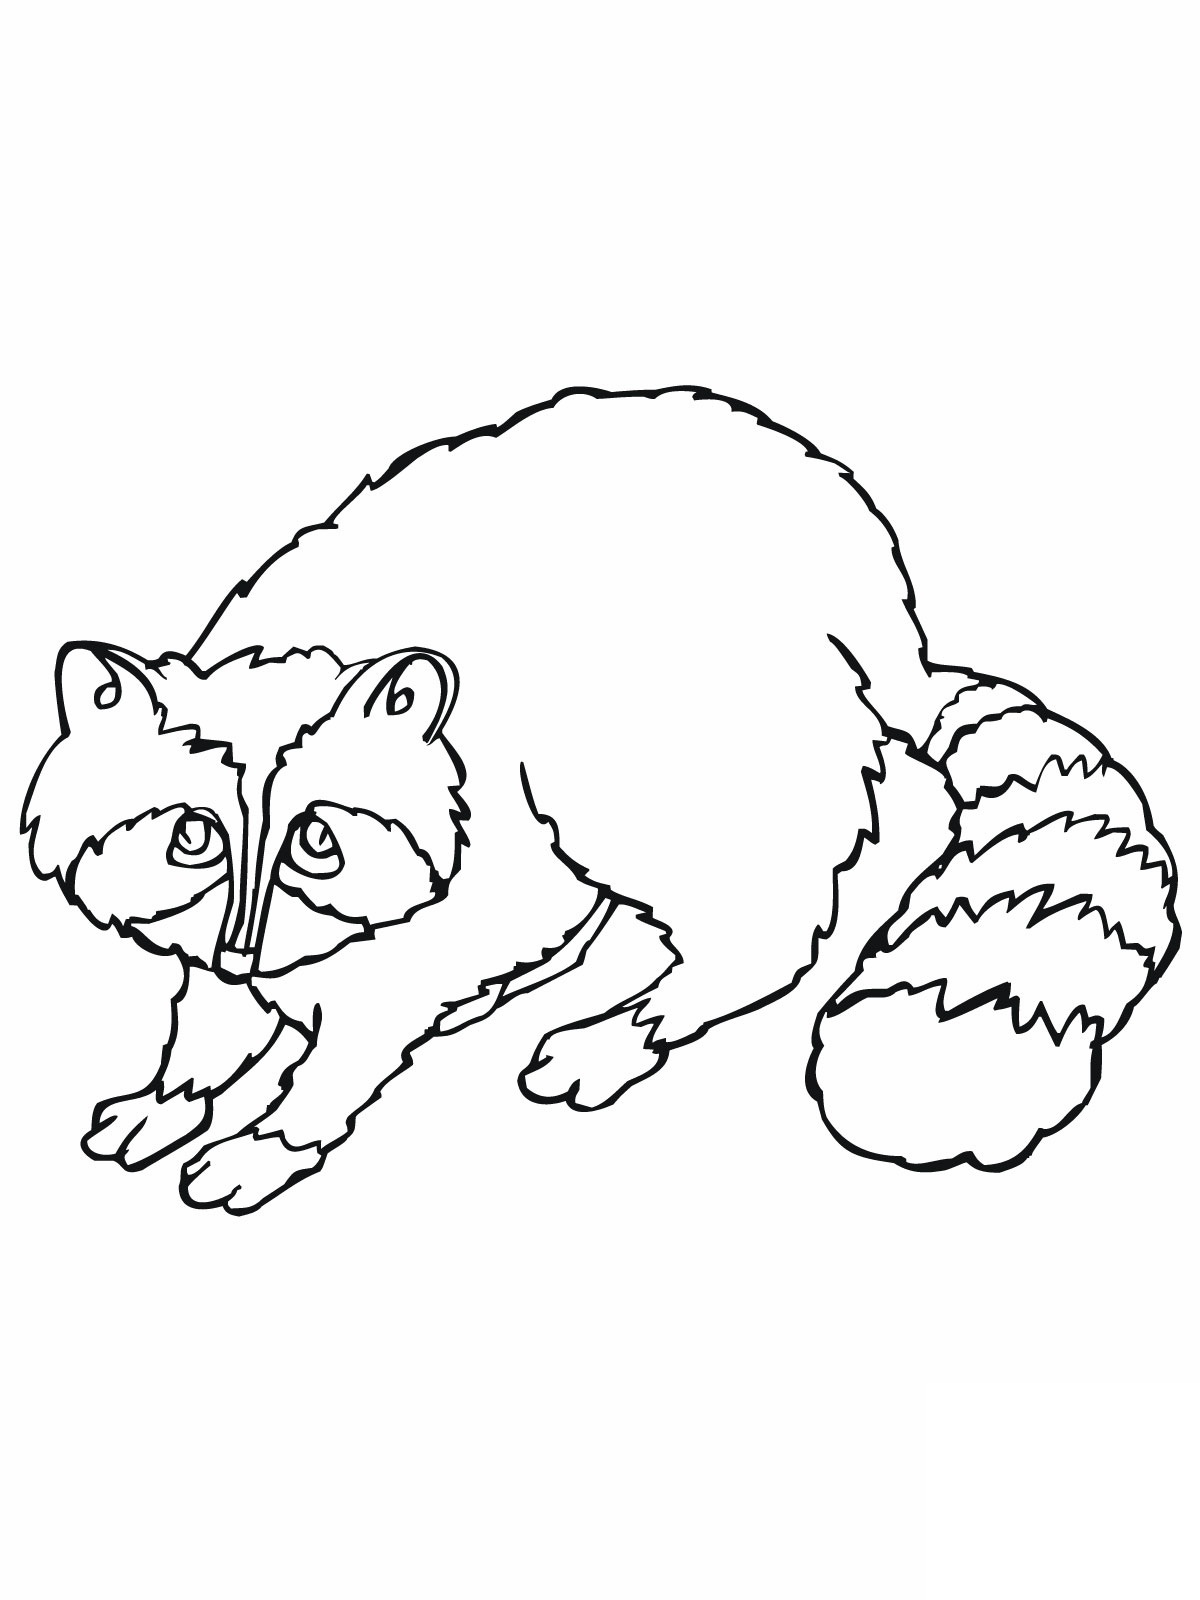 Raccoon Coloring Pages to download and print for free